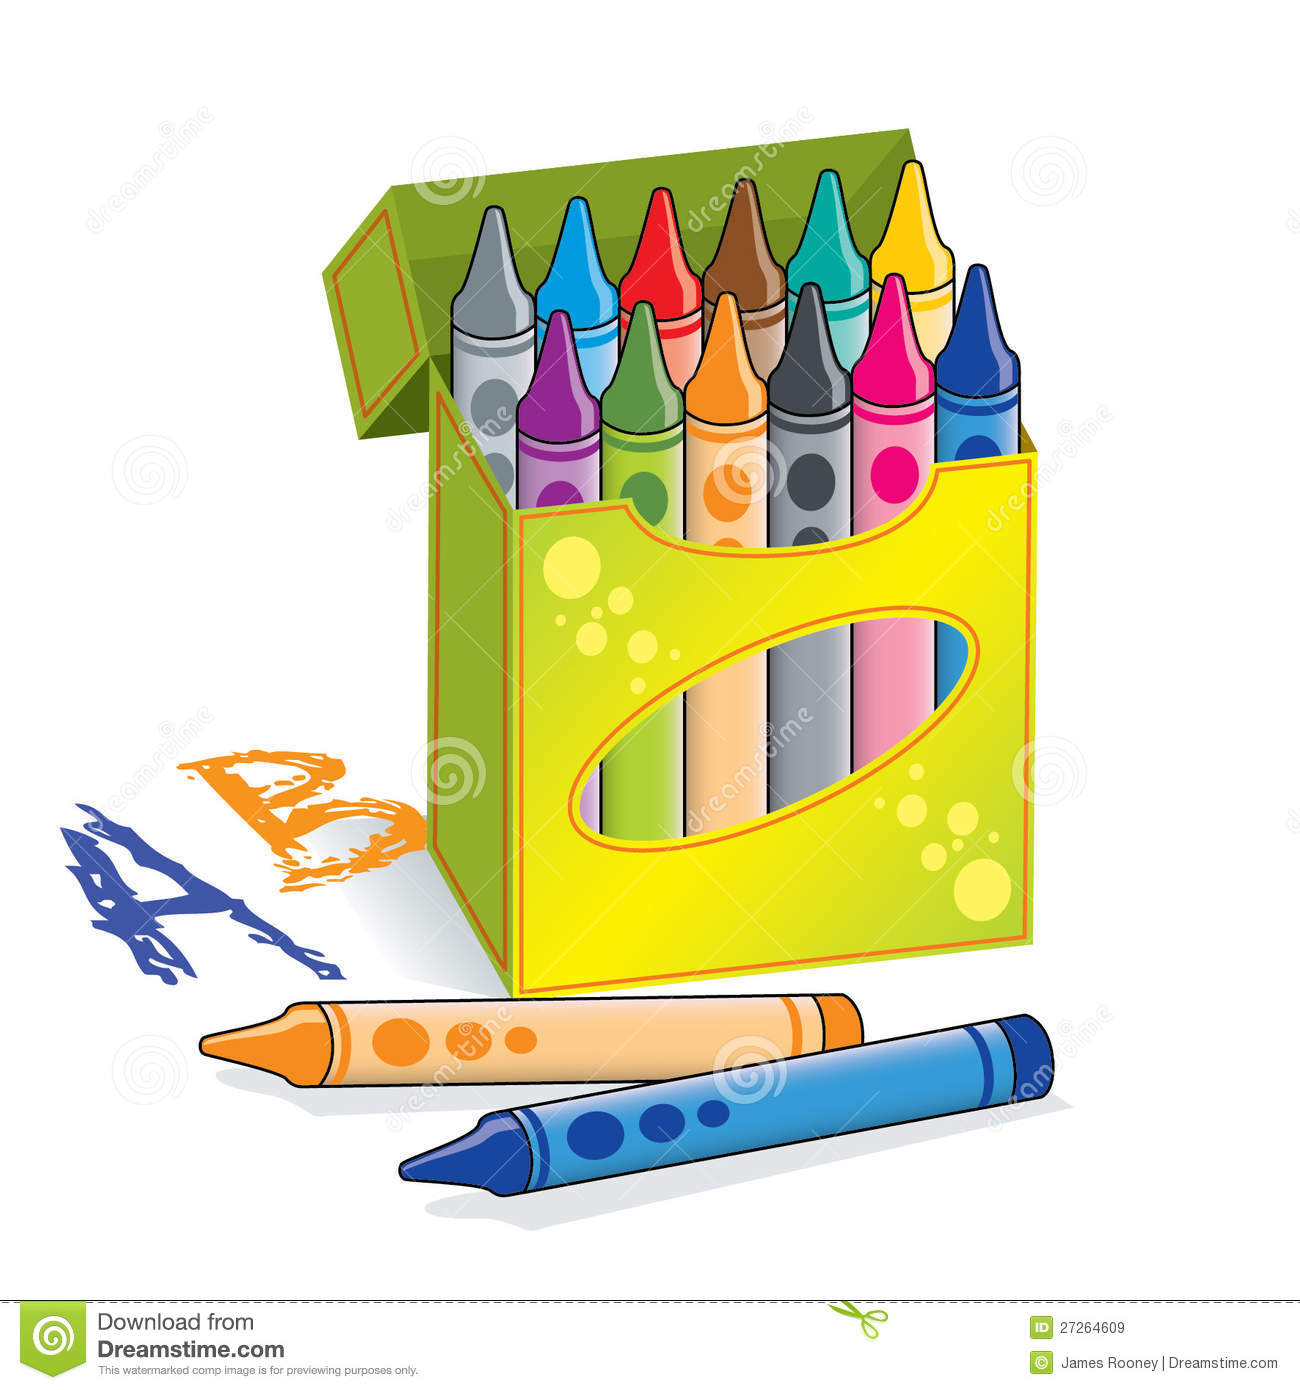 Box Of Crayons Royalty Free Stock Images   Image  27264609